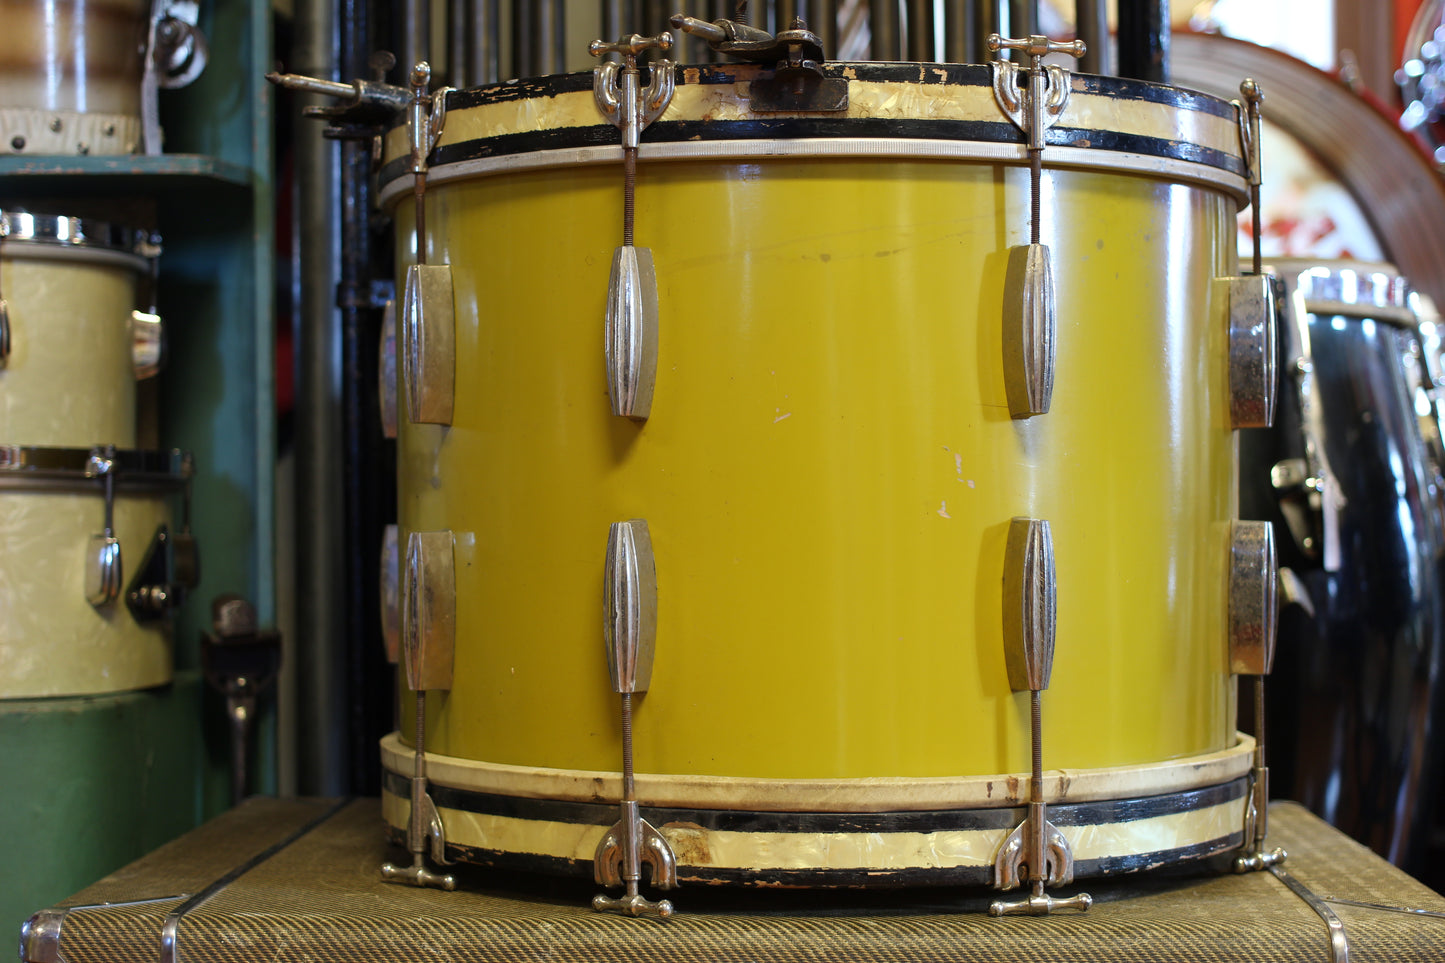 1940's Slingerland Radioking in Mustard Yellow Lacquer 14x20 16x16 12x14 9x13